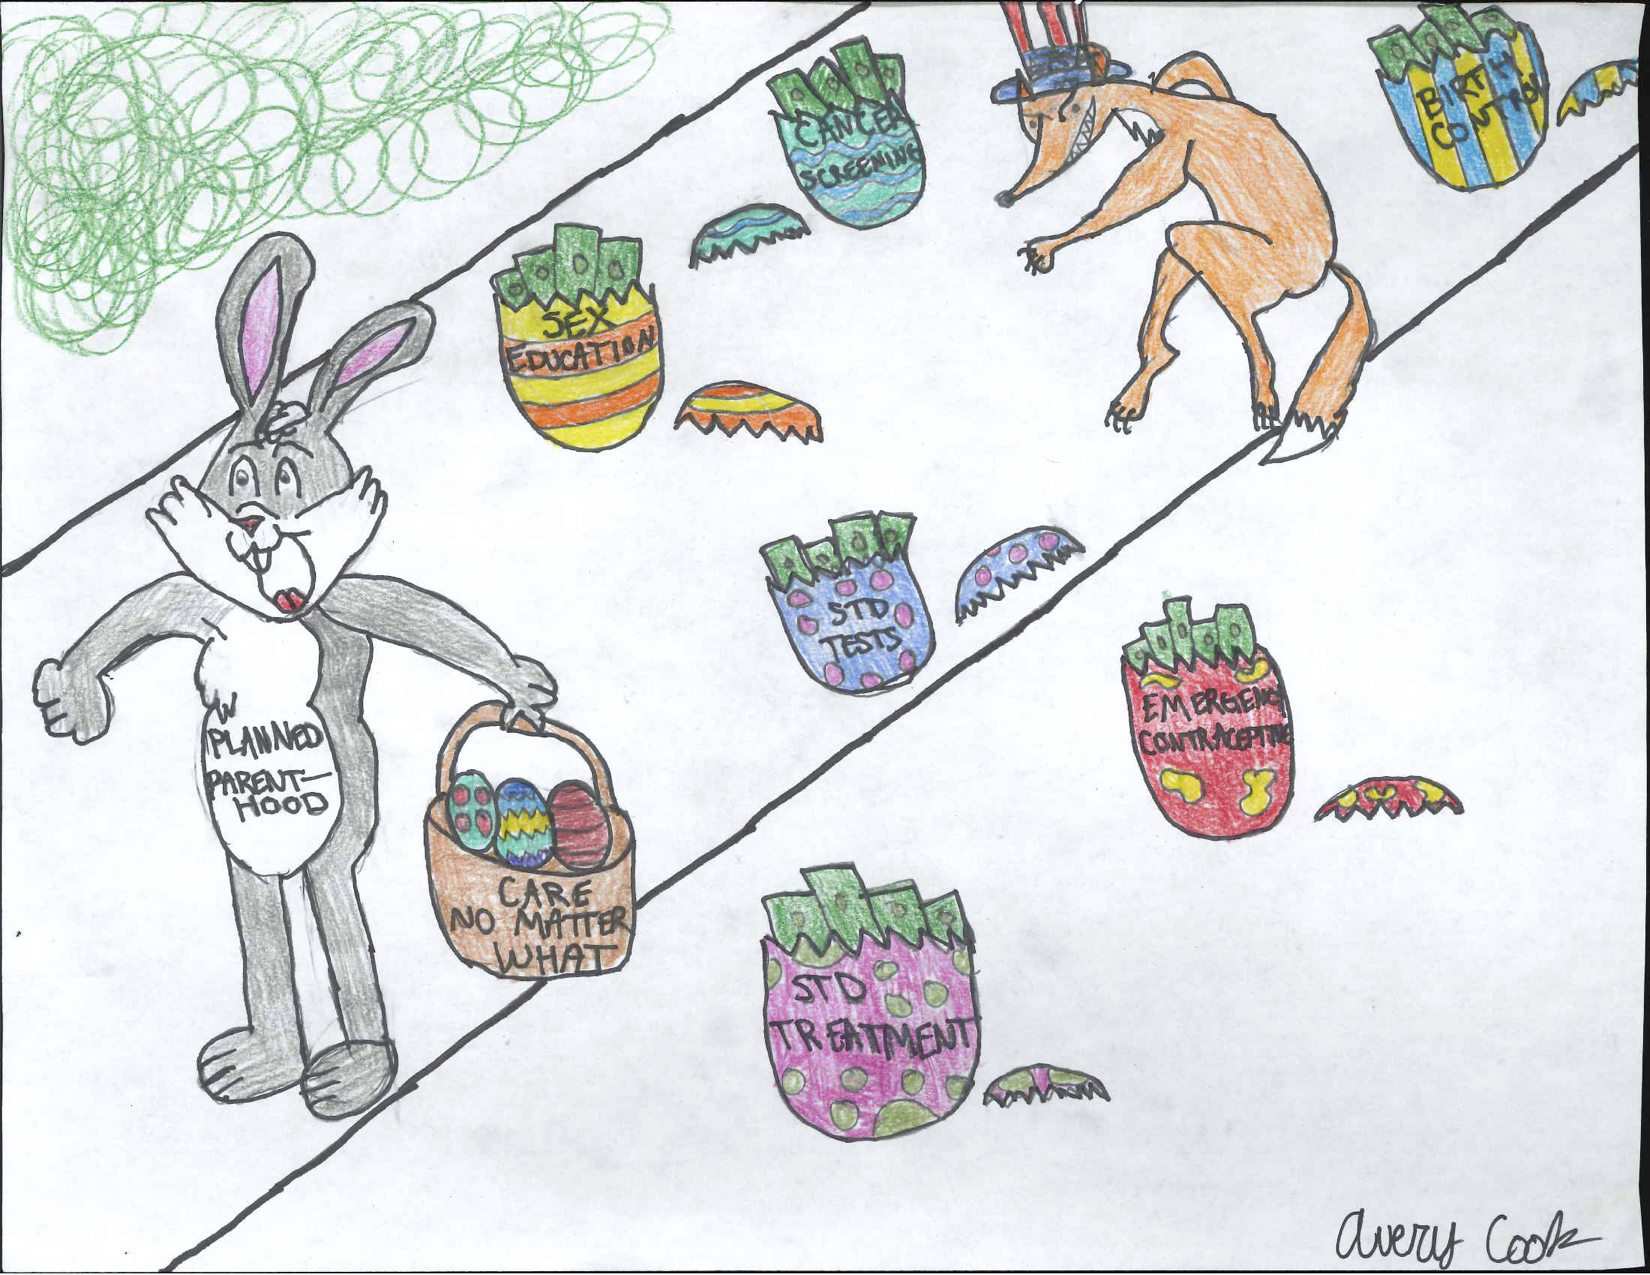 Editorial Cartoon: An Easter Egg Hunt For Funding